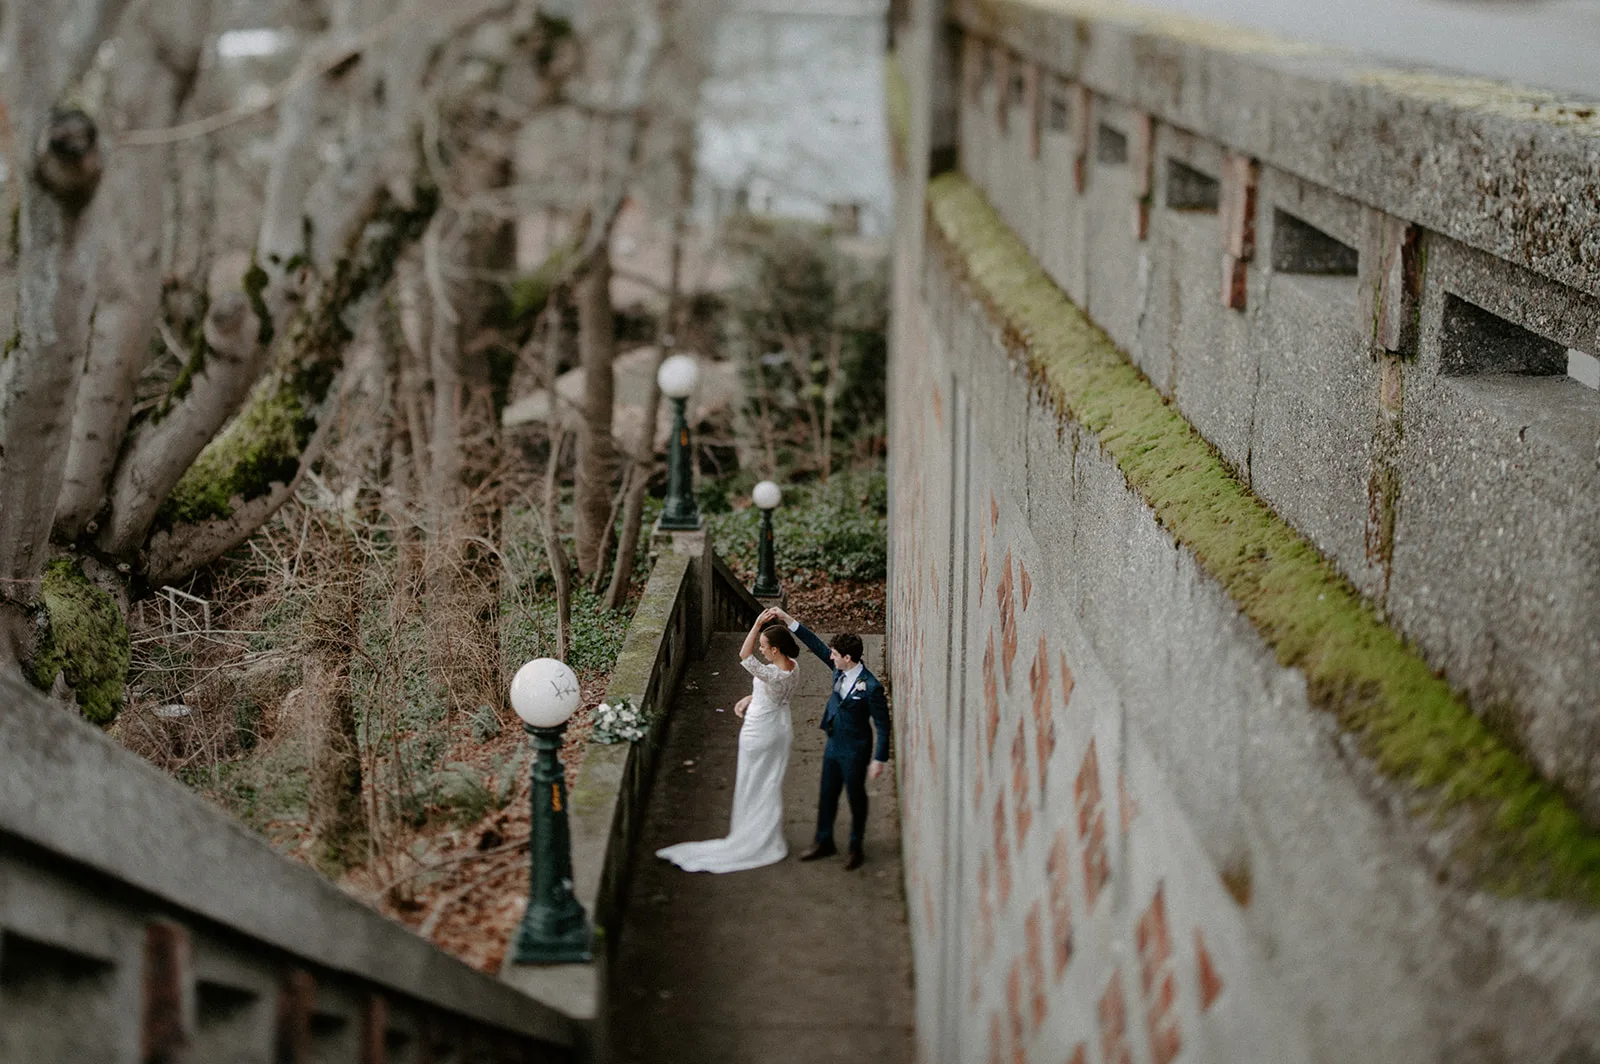 A bride and groom share their first dance on an outdoor pathway, surrounded by trees and vintage lampposts, creating a magical and intimate atmosphere.